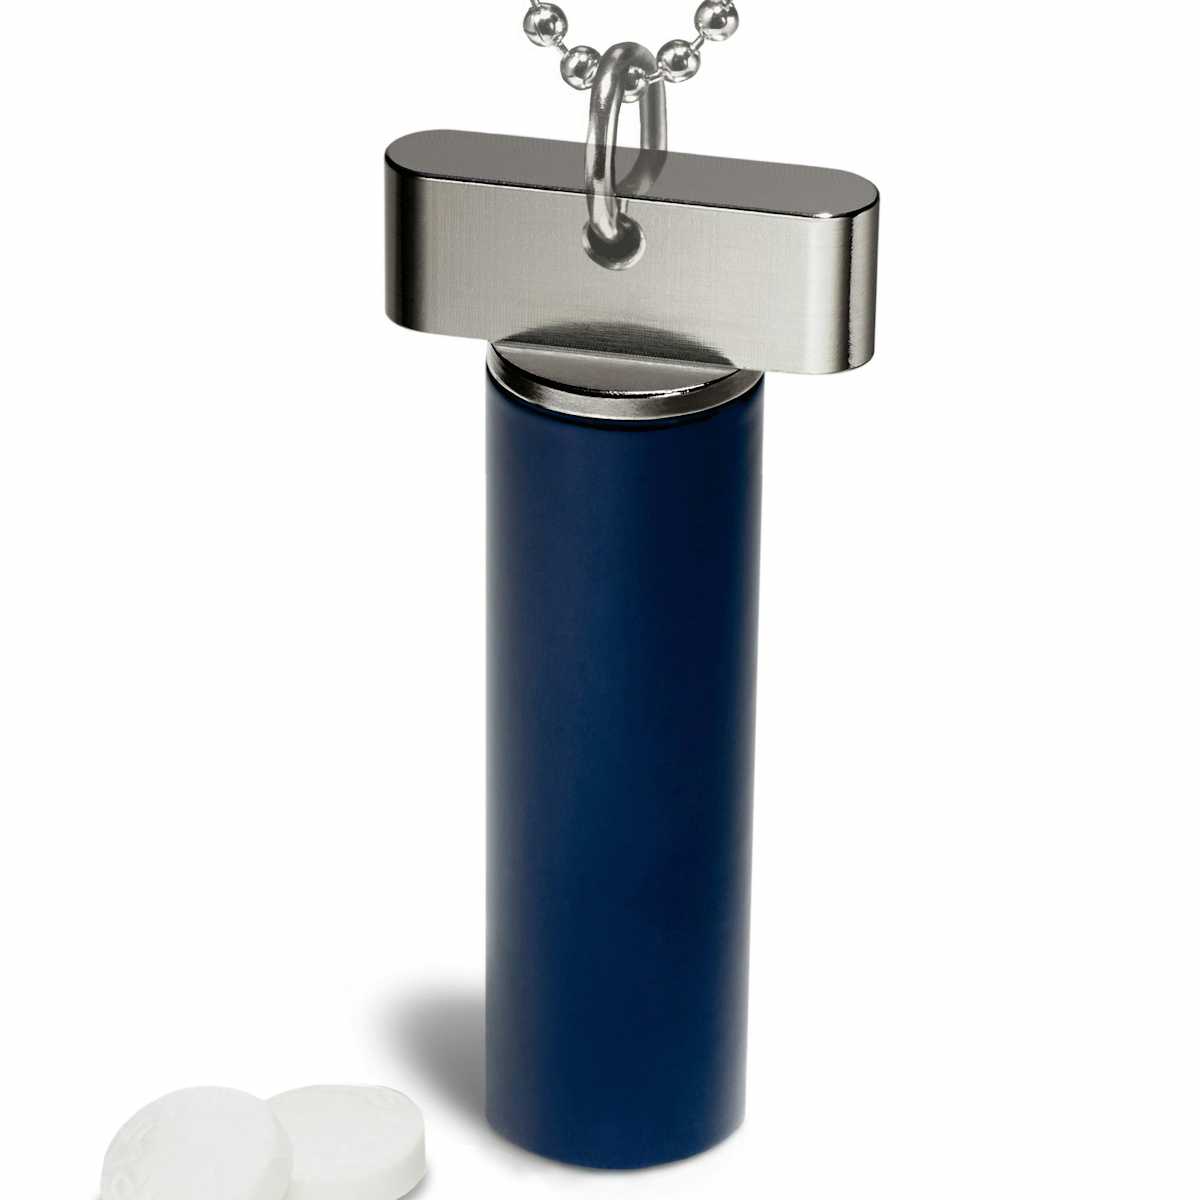 Navy Blue and Stainless Steel Keychain Pill Holder - Designer Nitro Necklace - Cielo Pill Holders